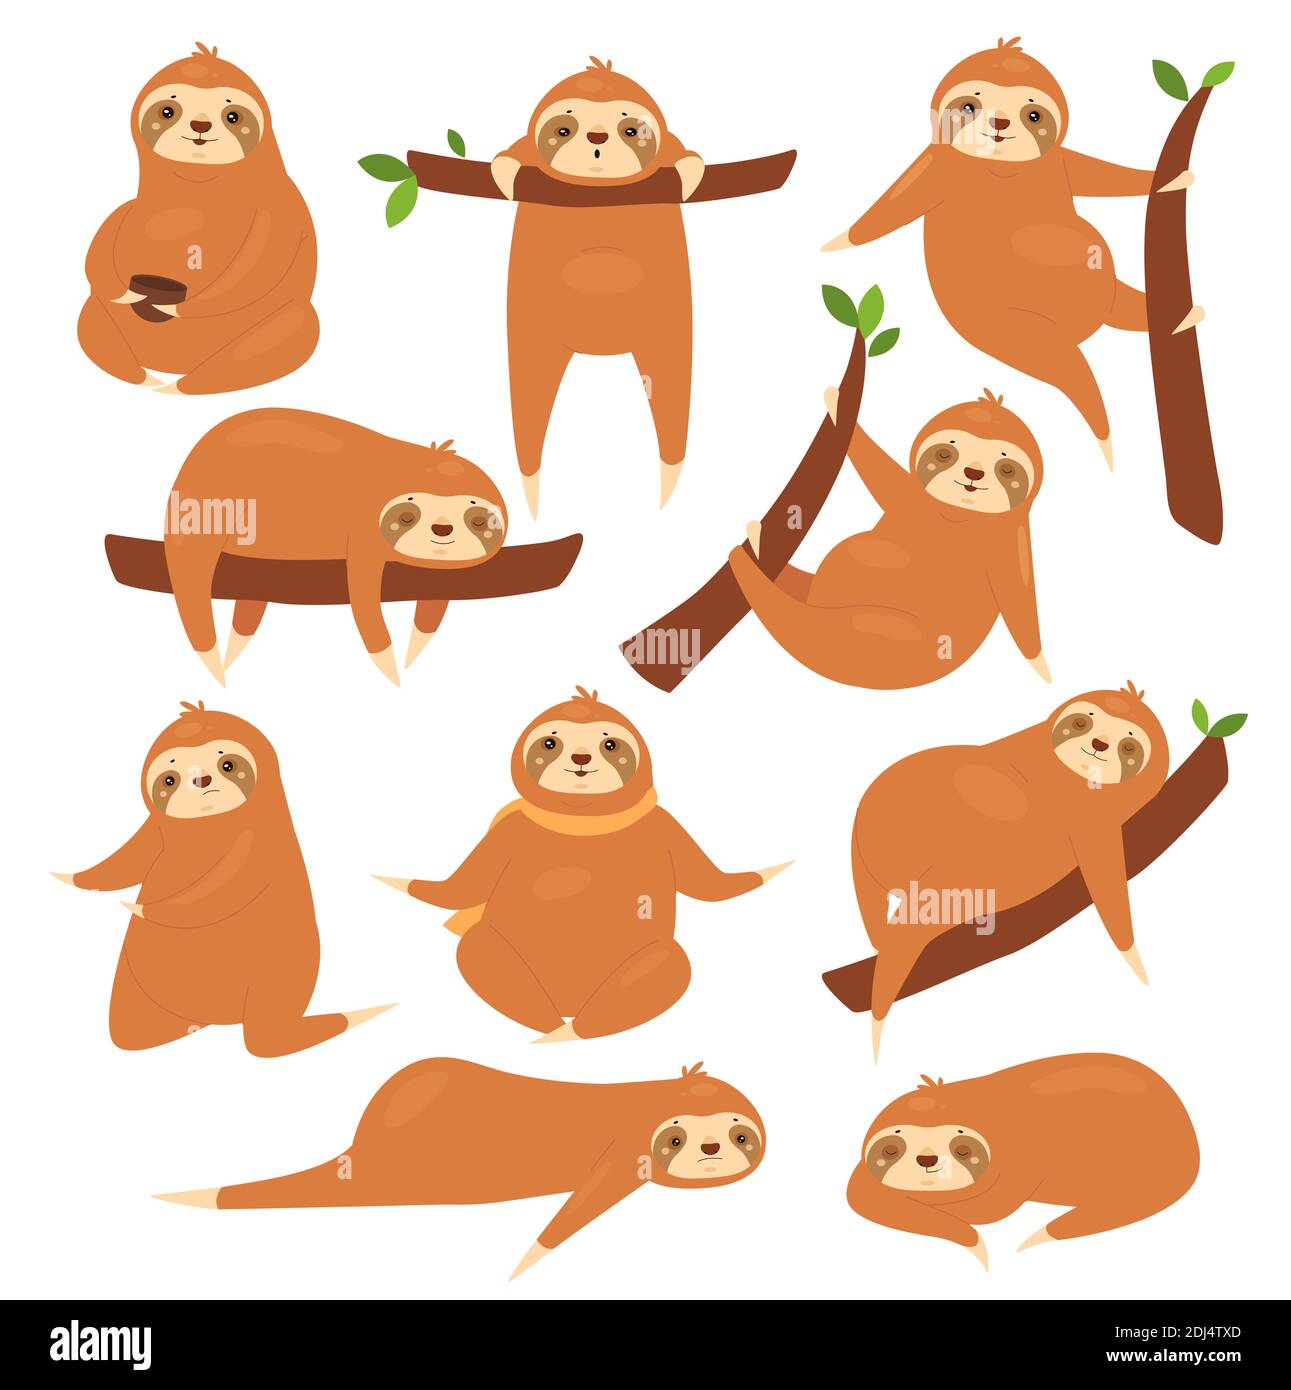 Sloths vector illustration set. Cartoon cute lazy various poses of sloths characters collection, funny brown animal sleeping on tropical tree branch in jungle, hanging and sleeping isolated on white Stock Vector